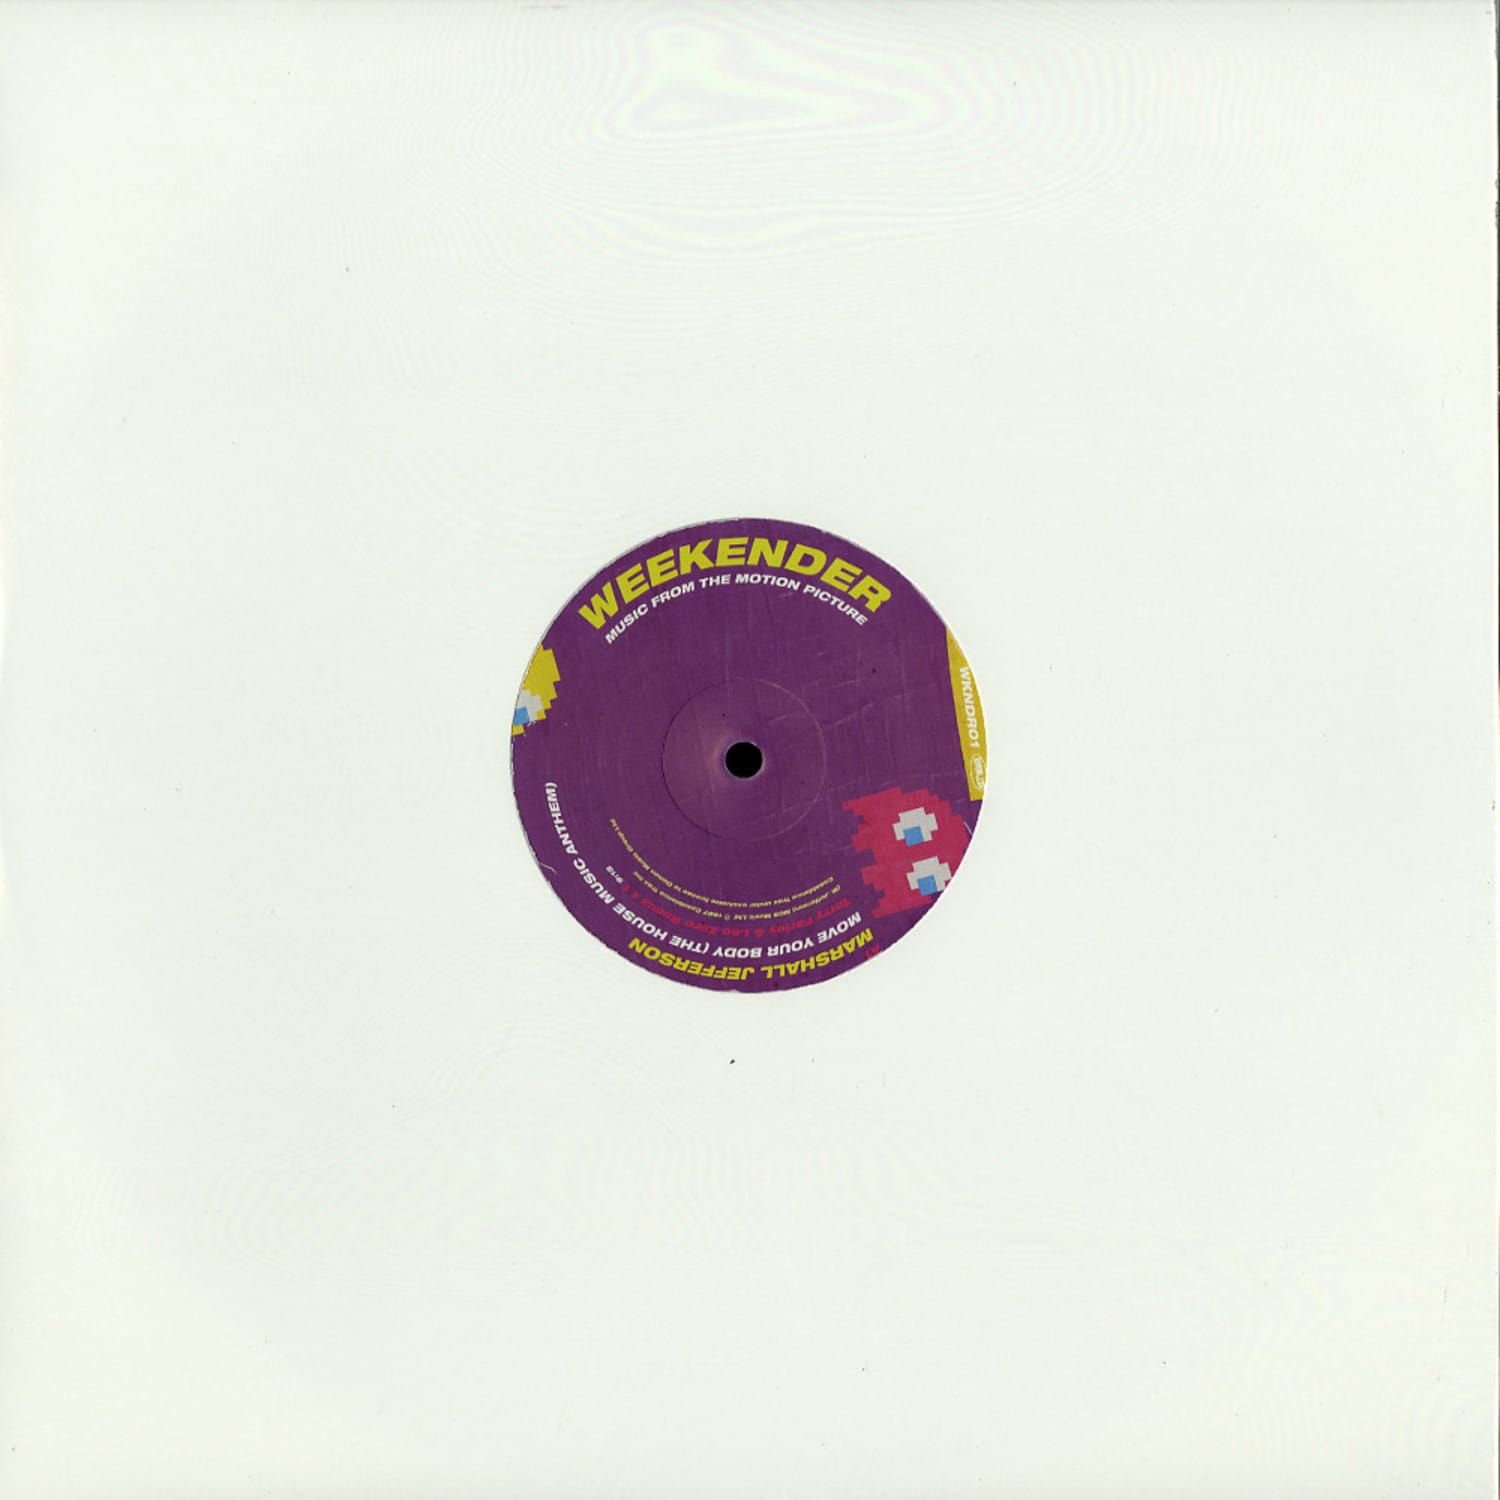 Marshall Jefferson / Frankie Knuckles - WEEKENDER - MUSIC FROM THE MOTION PICTURE